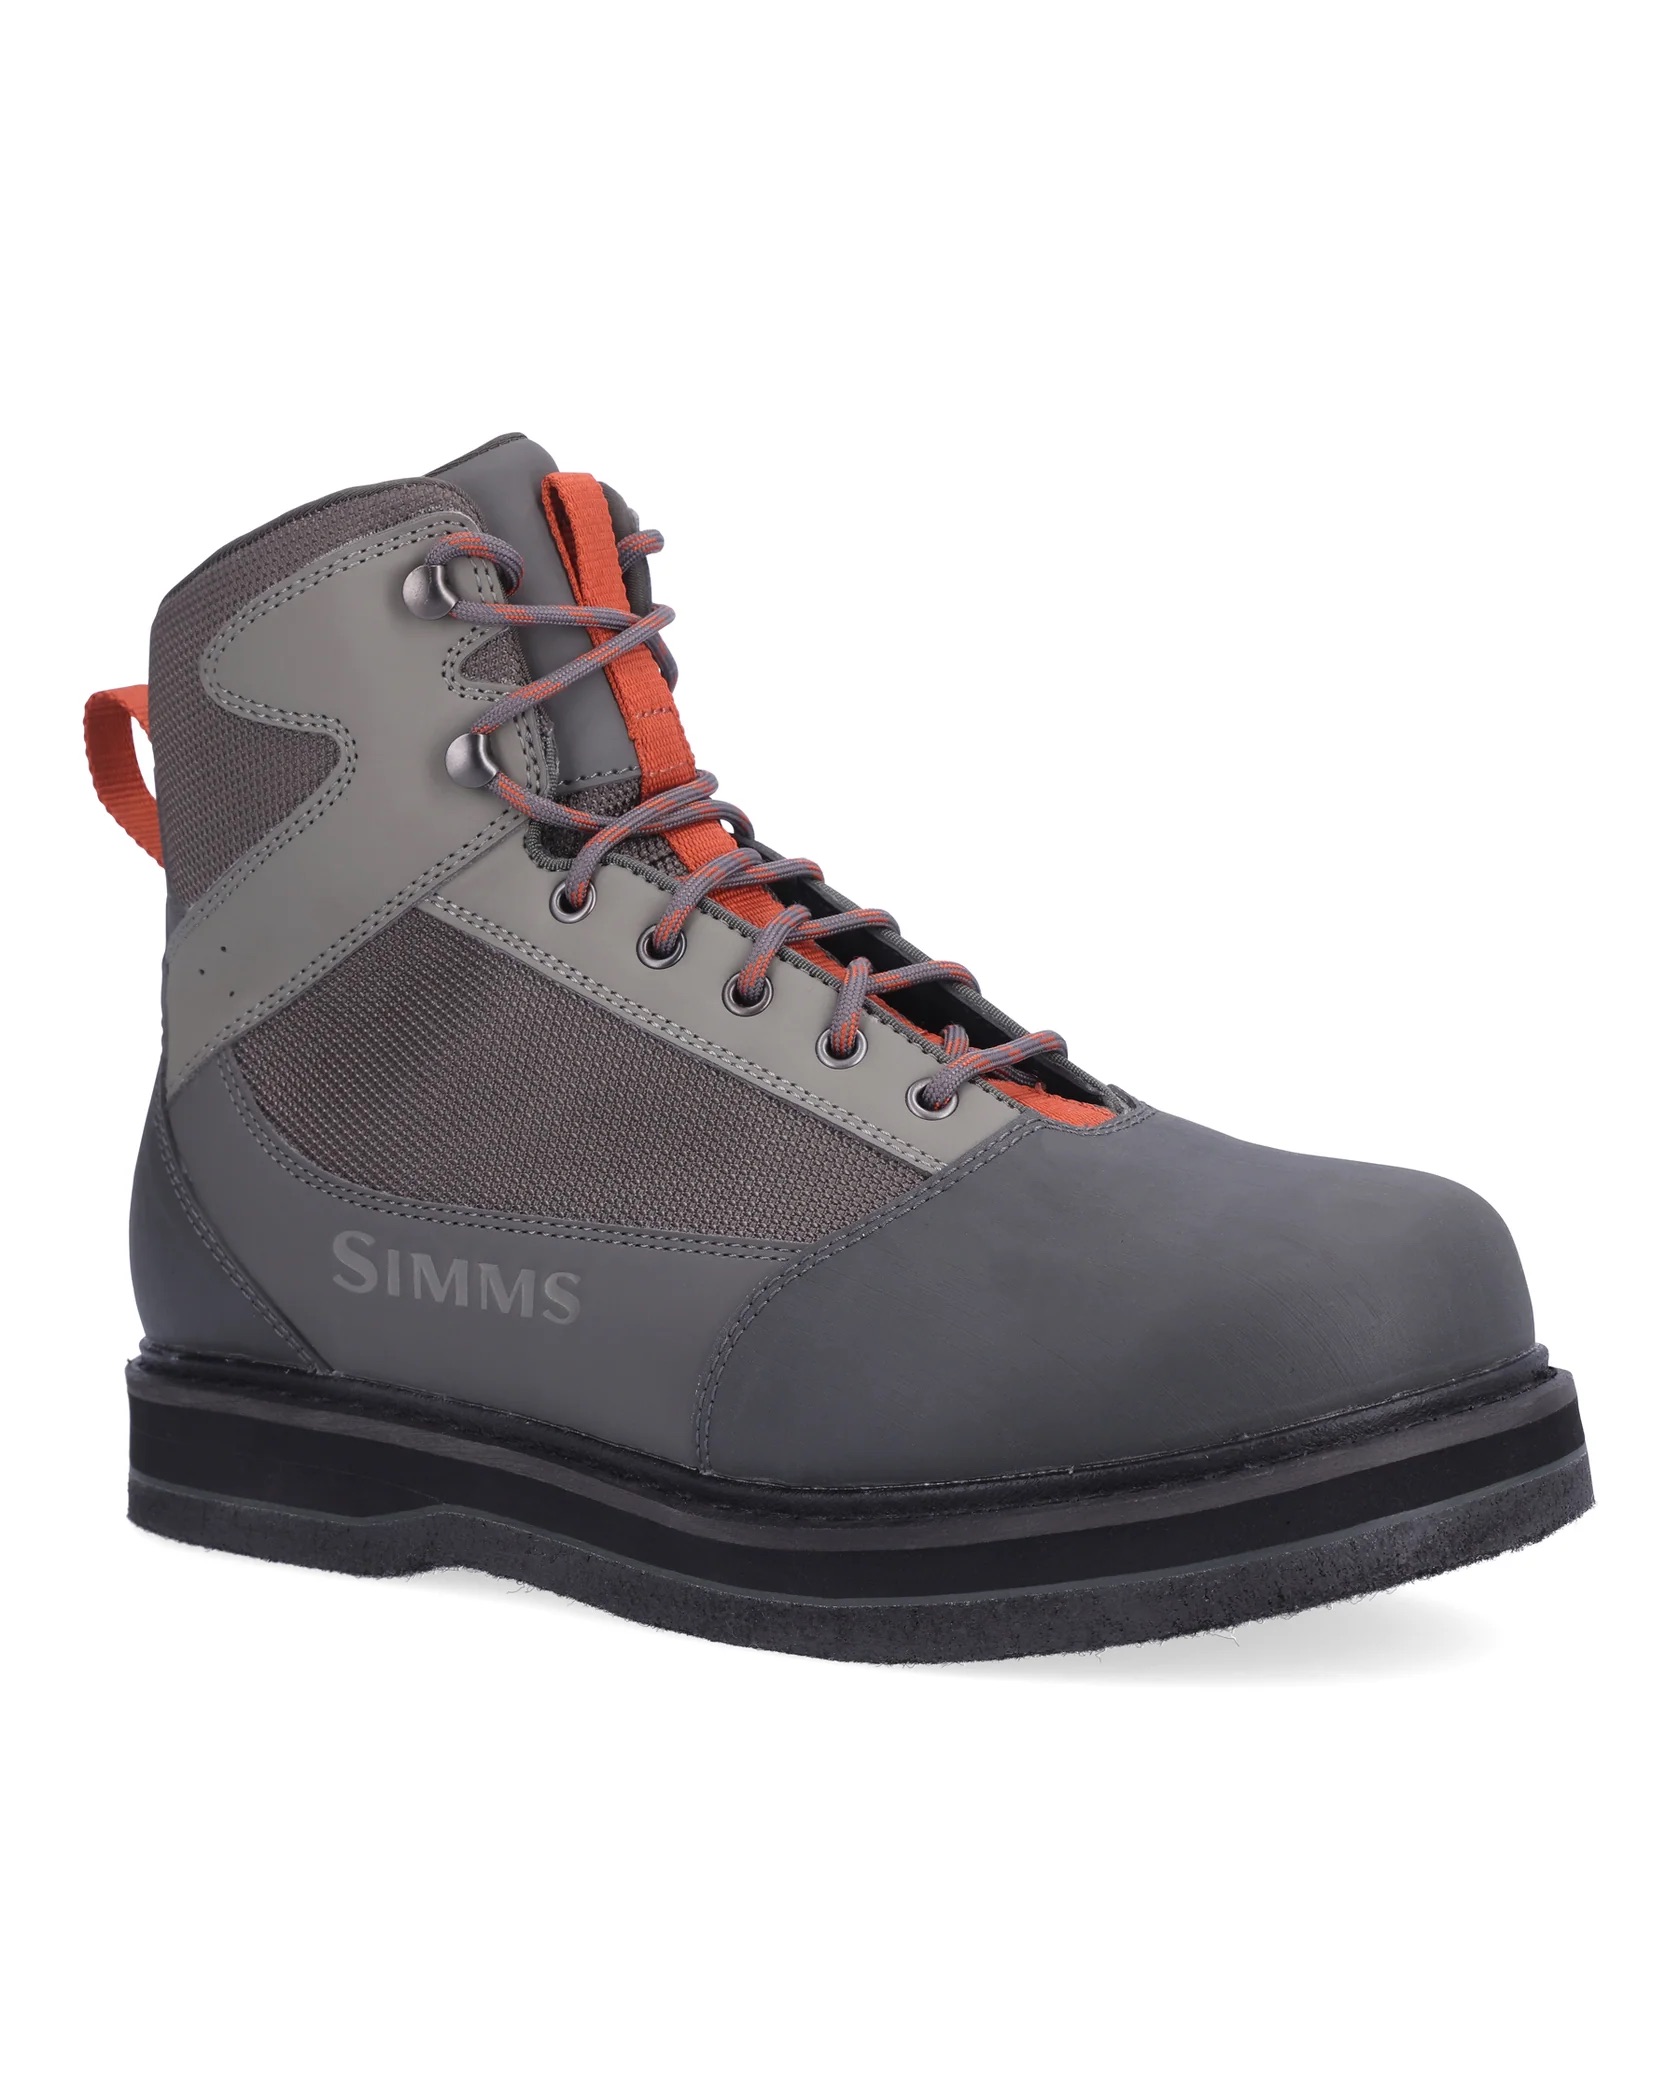 Simms Tributary Wading Boot - Felt - Size 13